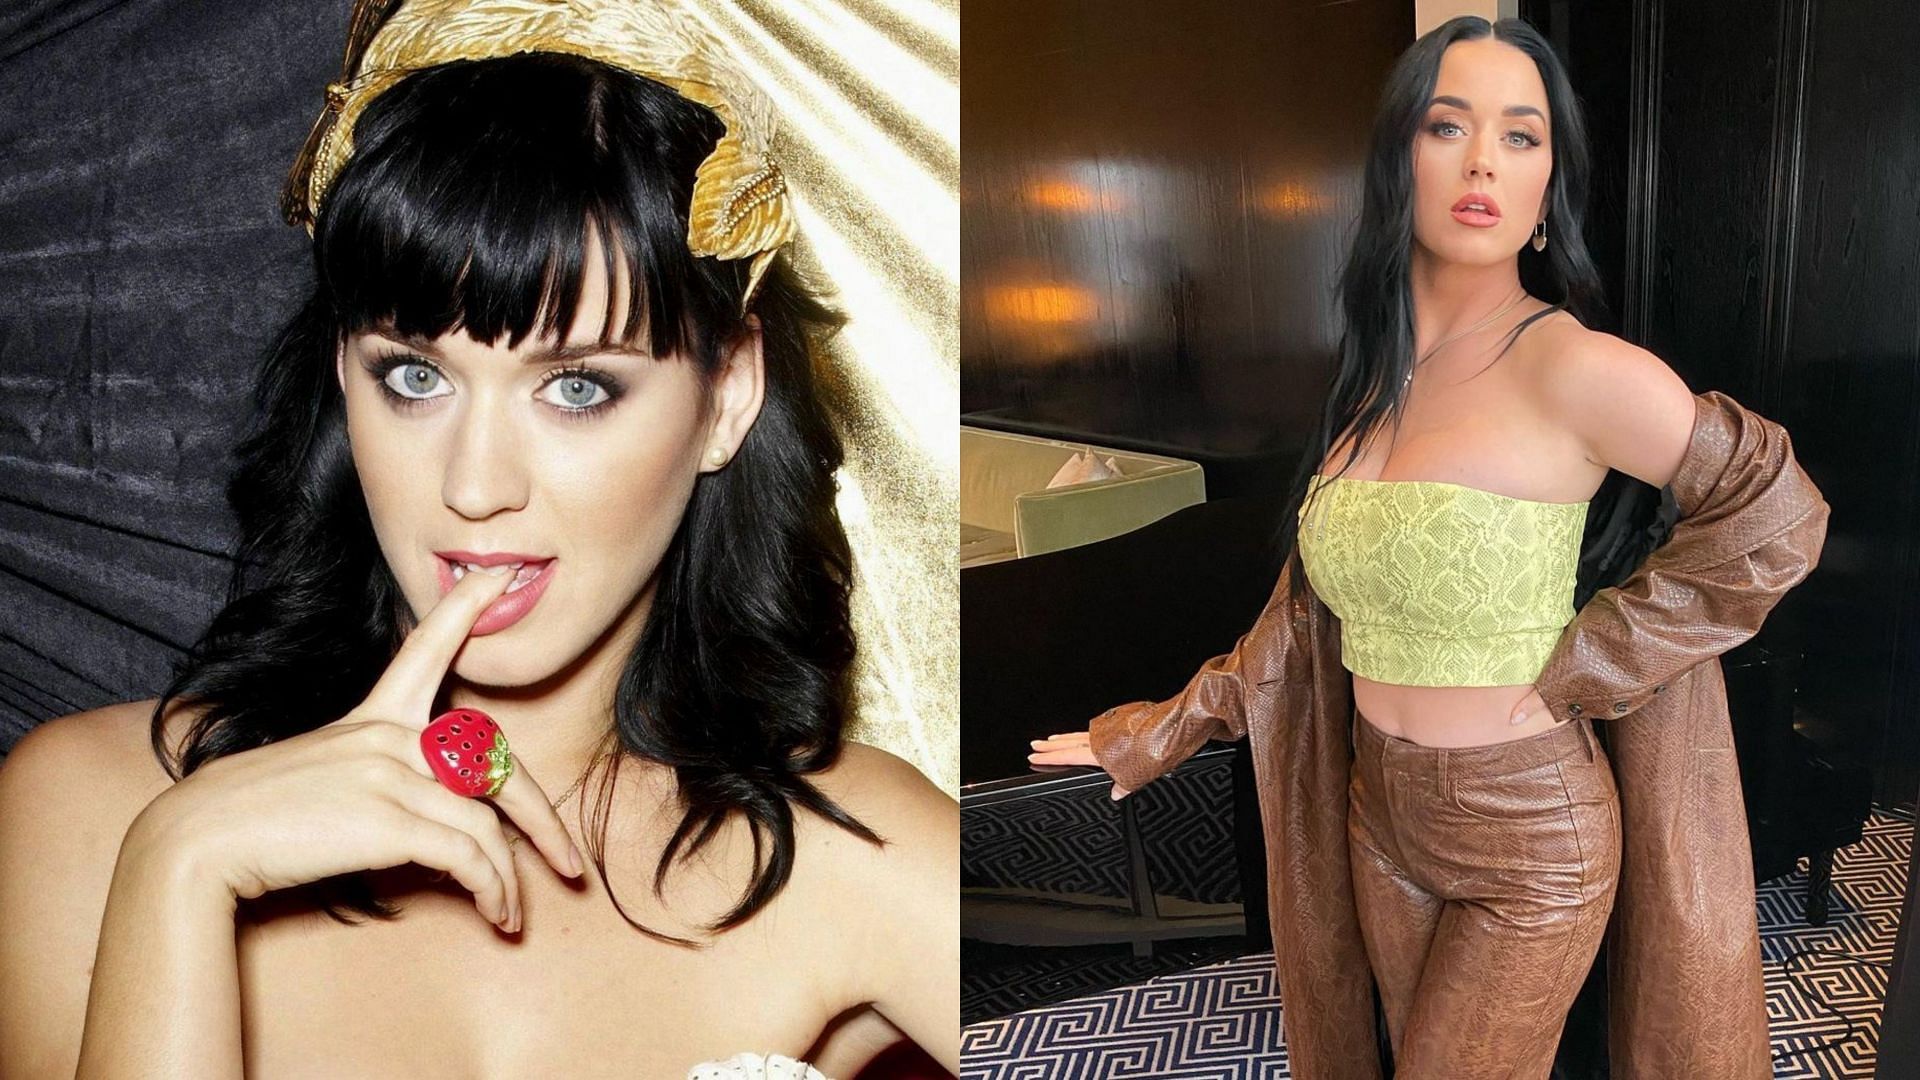 Katy Perry previously crossed paths with WWE CCO Triple H and Stephanie McMahon